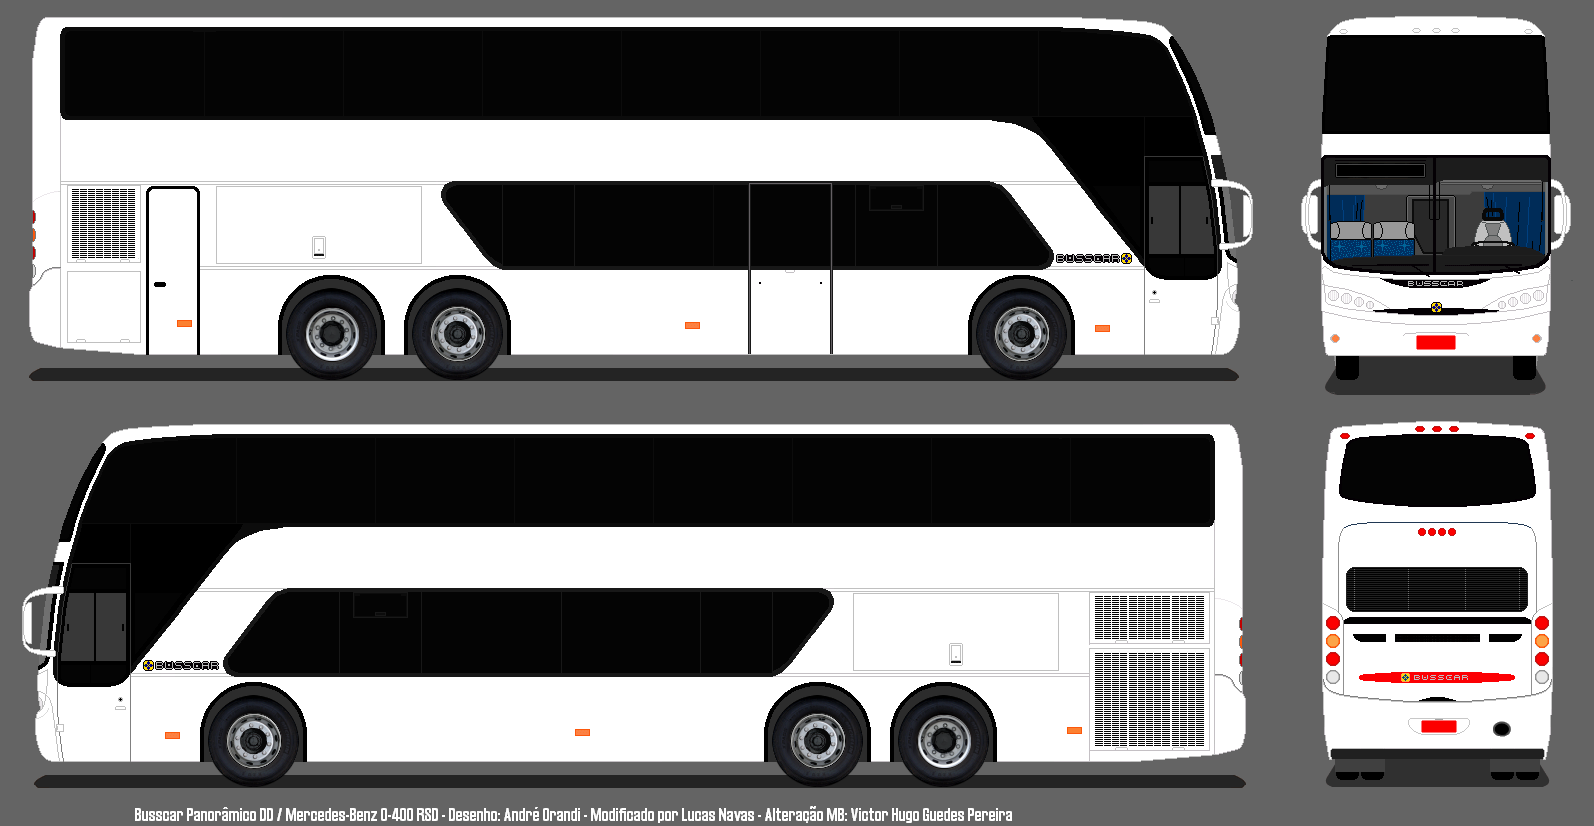 [Busscar+Panoramico+DD+-+MB+O-400+RSD.PNG]